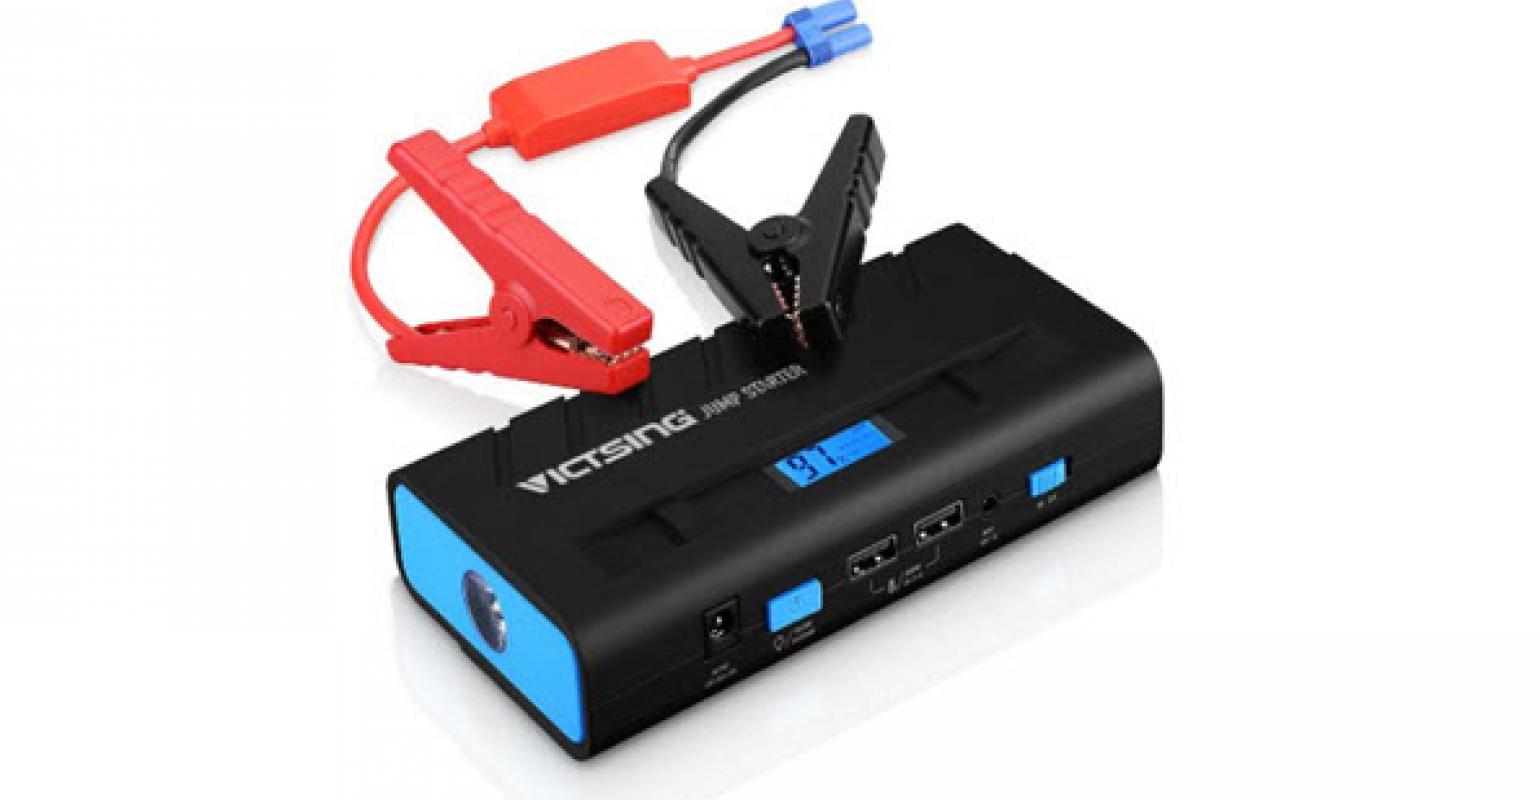 Review: VicTsing Gadget Charger and Auto Battery Jump Starter  ITPro  Today: IT News, How-Tos, Trends, Case Studies, Career Tips, More